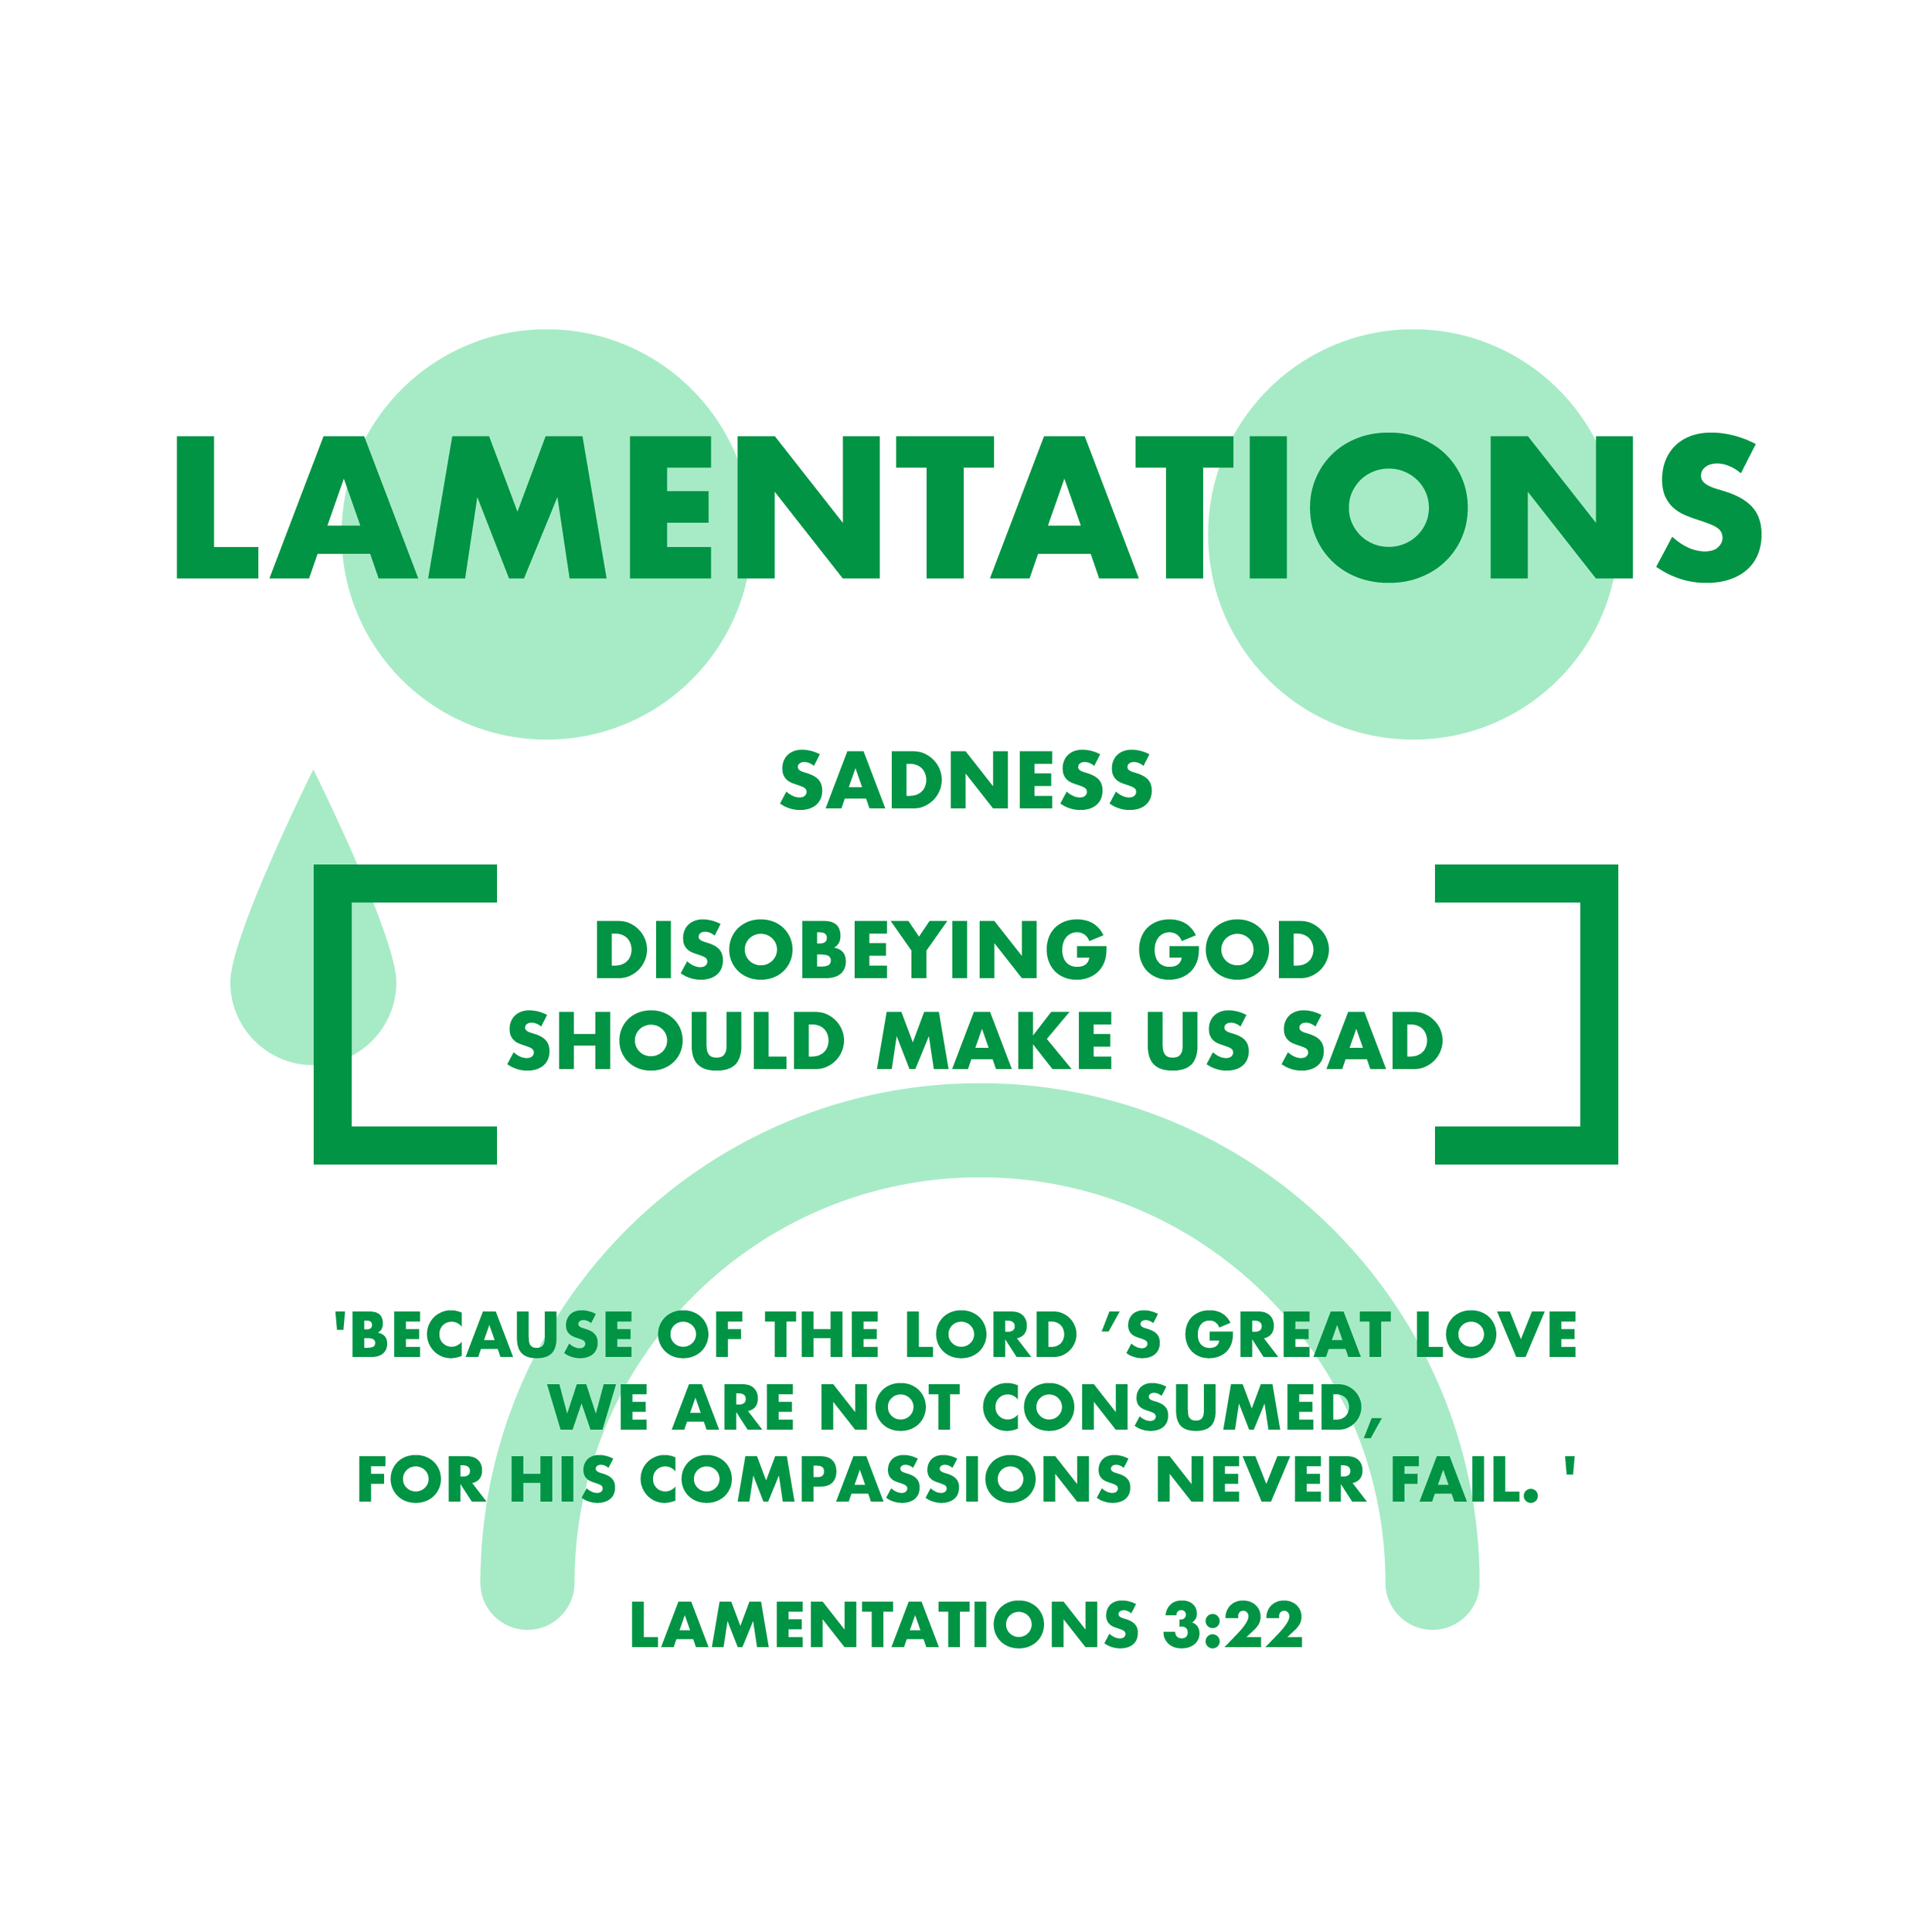 Books of the Bible_posters_23 Lamentations.png